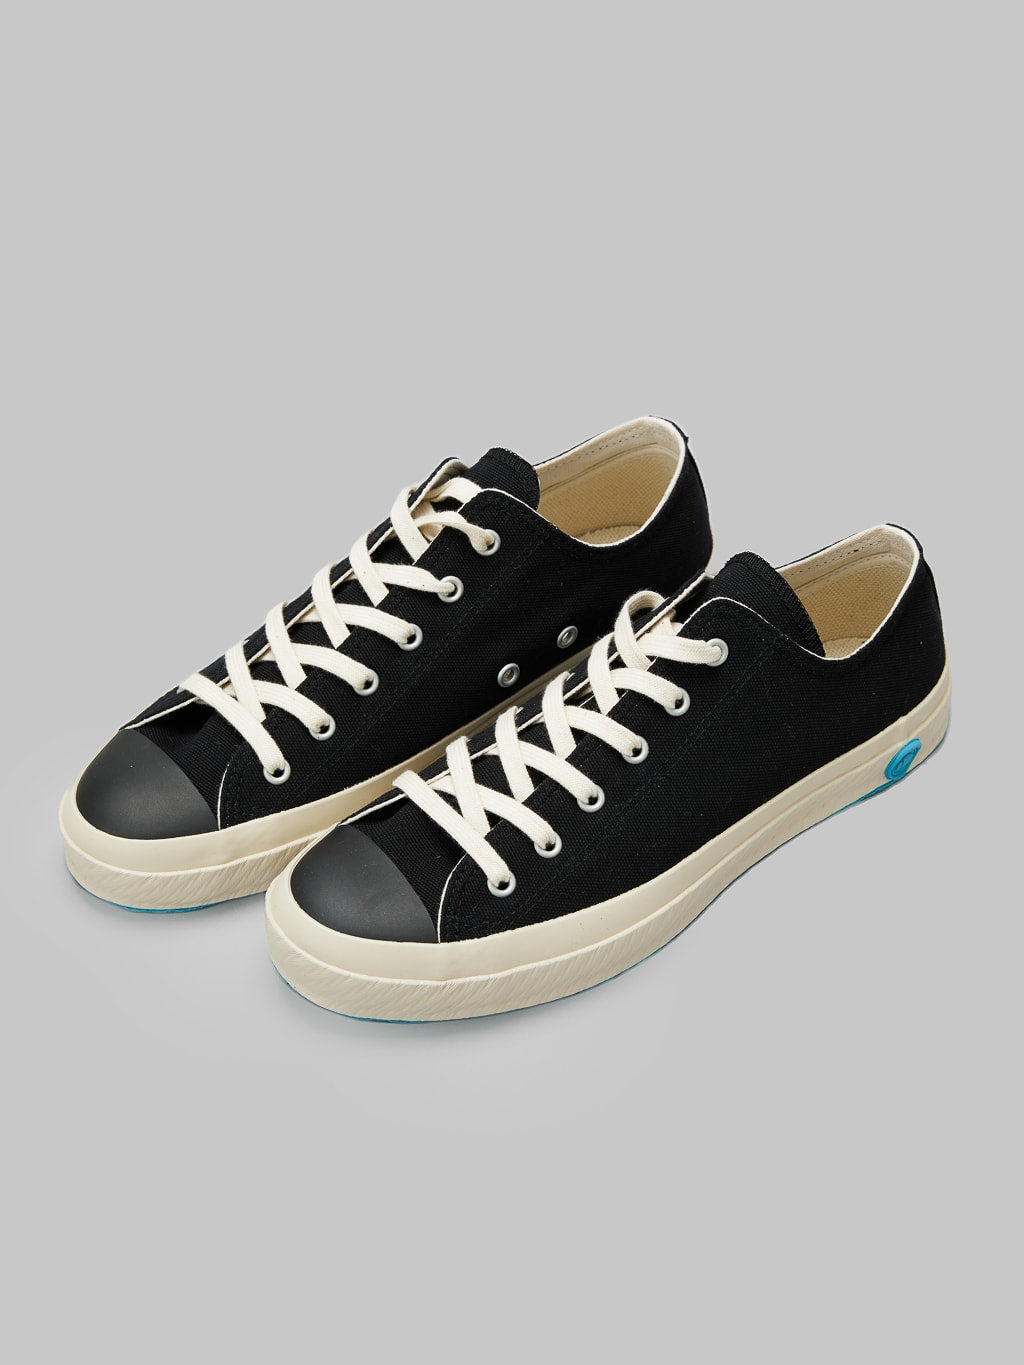 Shoes like pottery low sneaker black made in japan